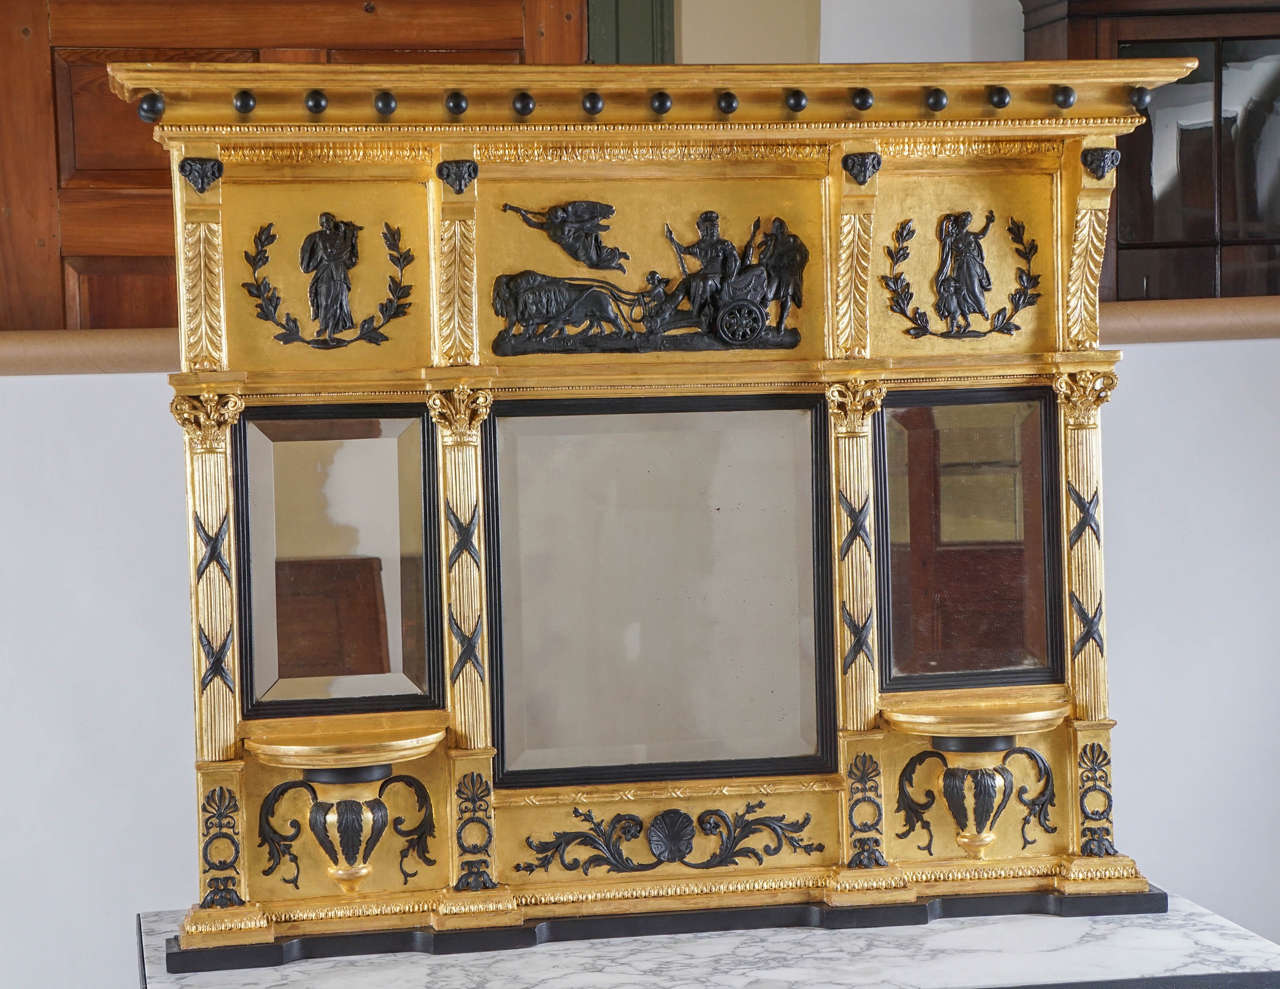 A truly exceptional circa 1800 George III English Regency neoclassical style bichrome giltwood and gesso overmantel mirror having top cavetto-and-ebonized-ball cornice surmounting three panels with acanthus corbels headed by ebonized ram's heads;